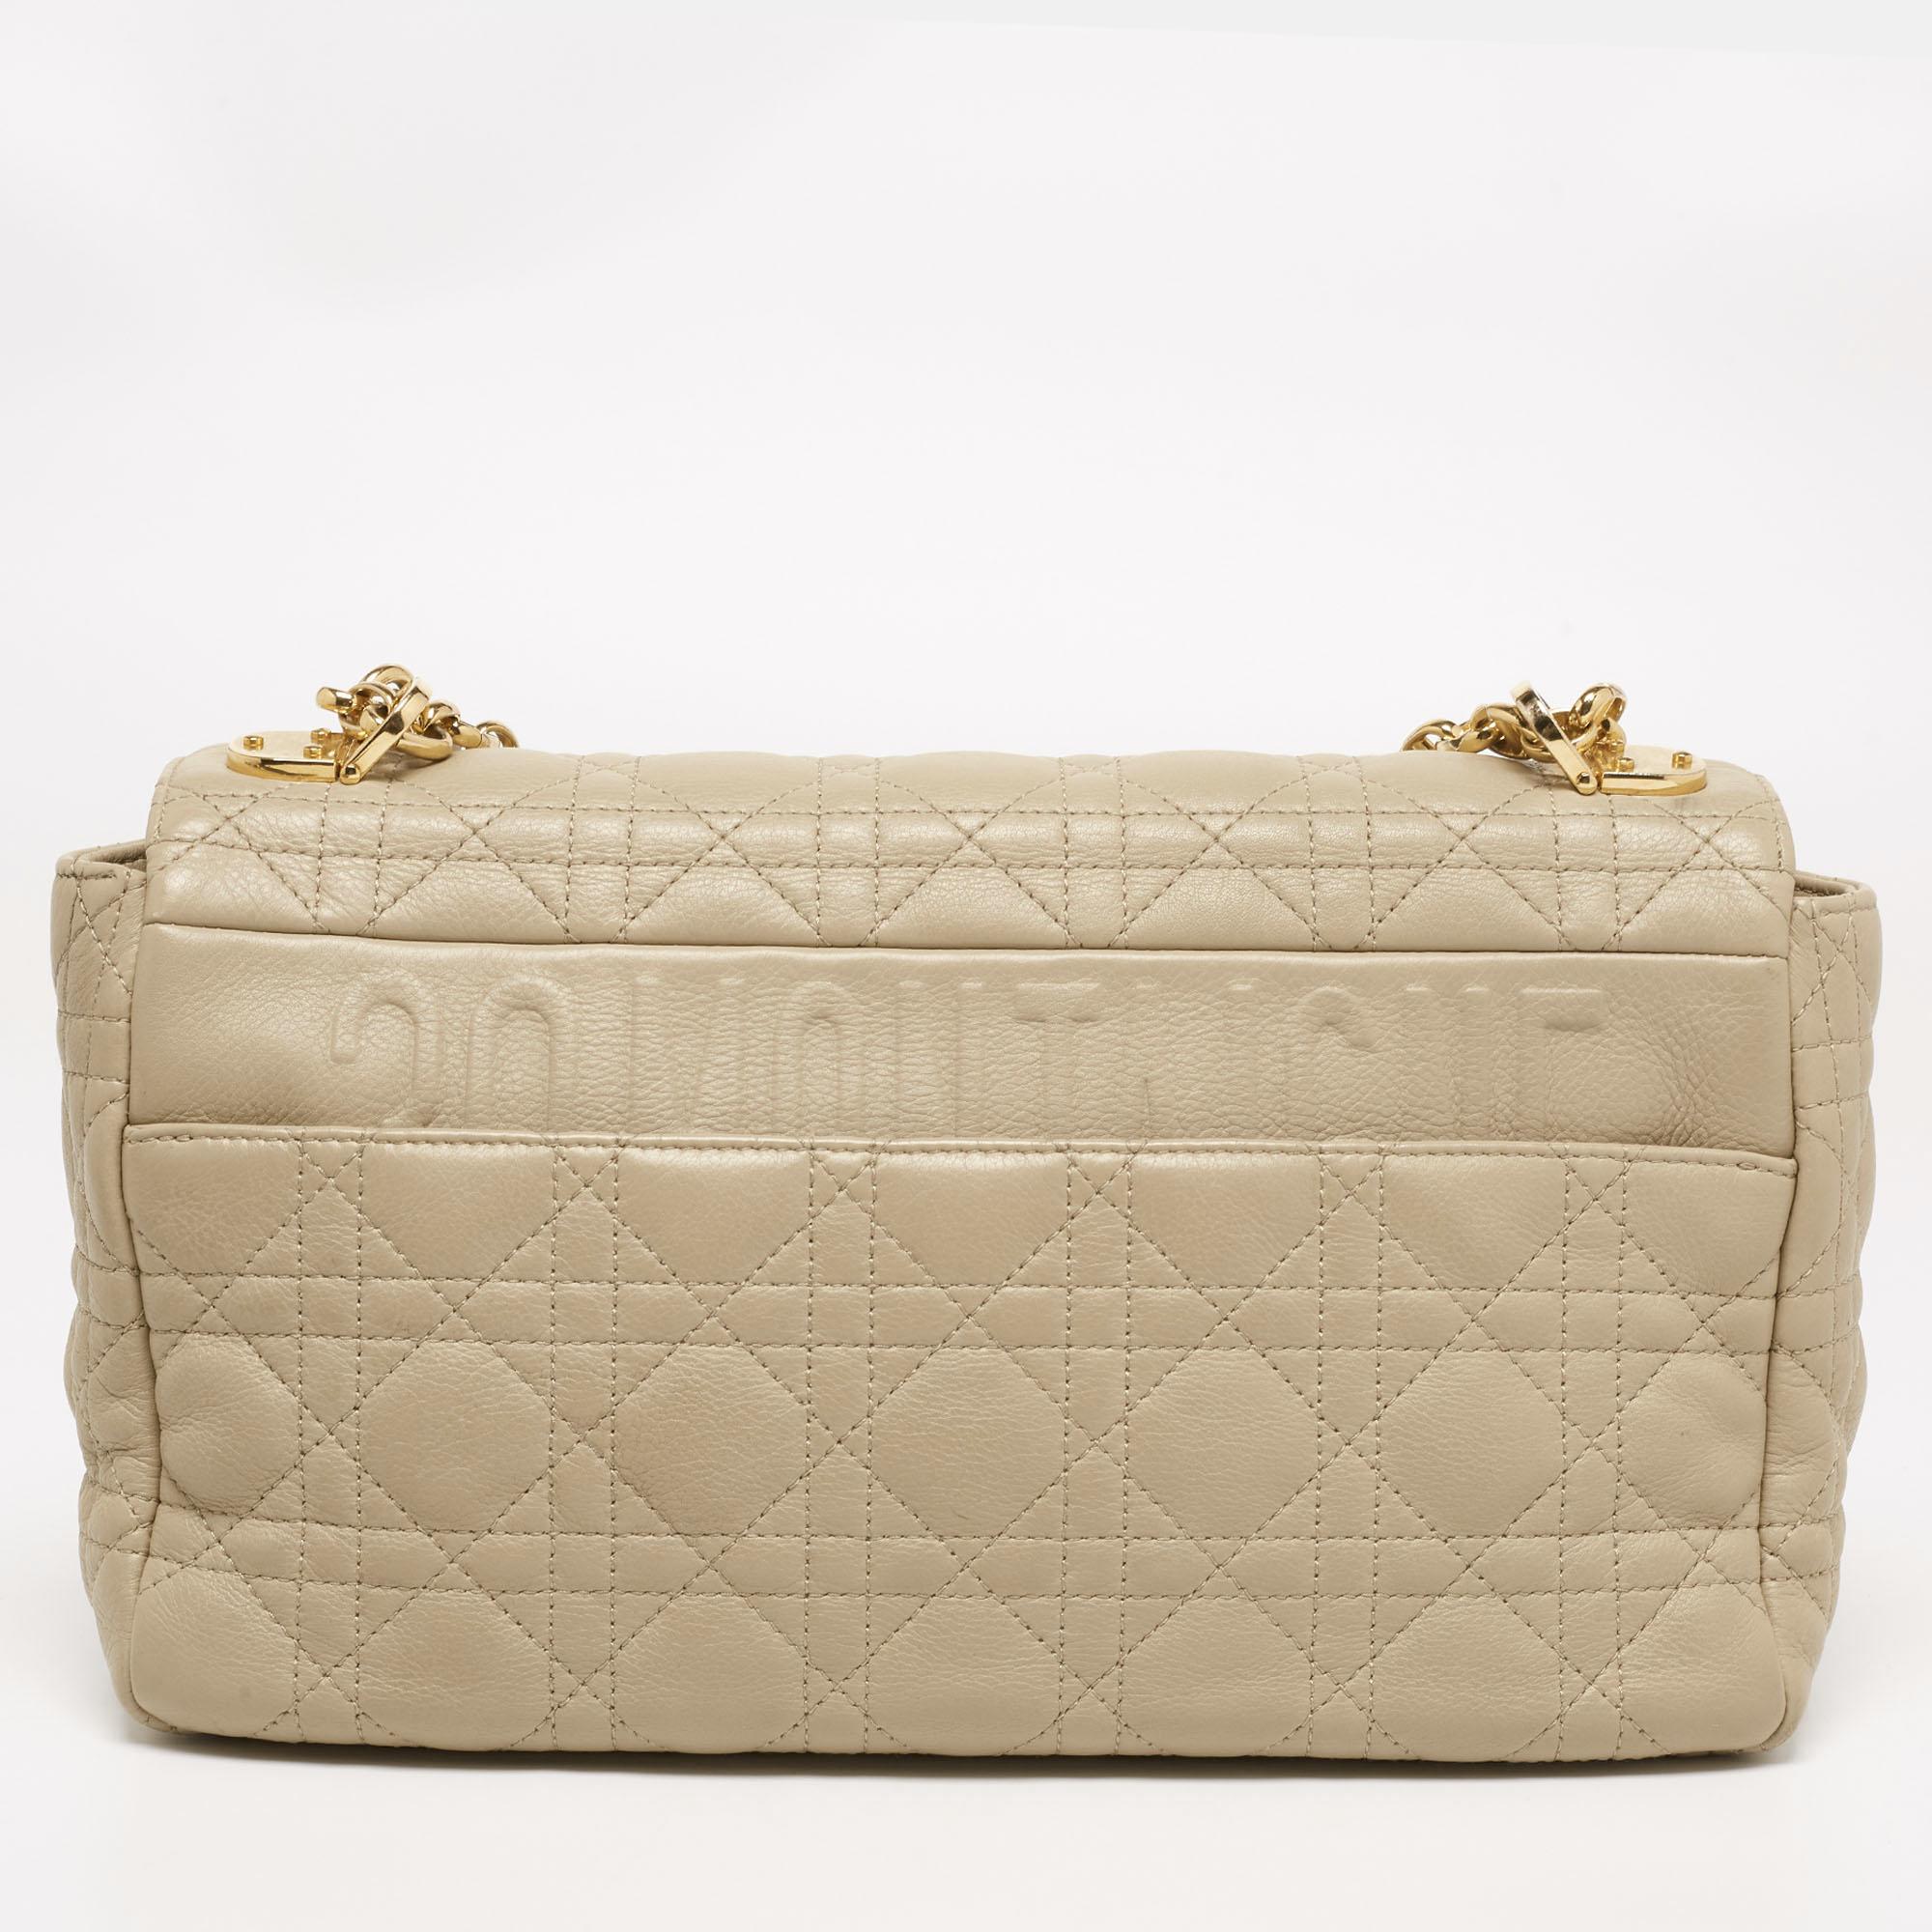 This shoulder bag from Dior is the bag of every woman's dream! It has a Cannage leather exterior with stunning gold-tone details. The beige creation is a perfect example of excellent craftsmanship.

